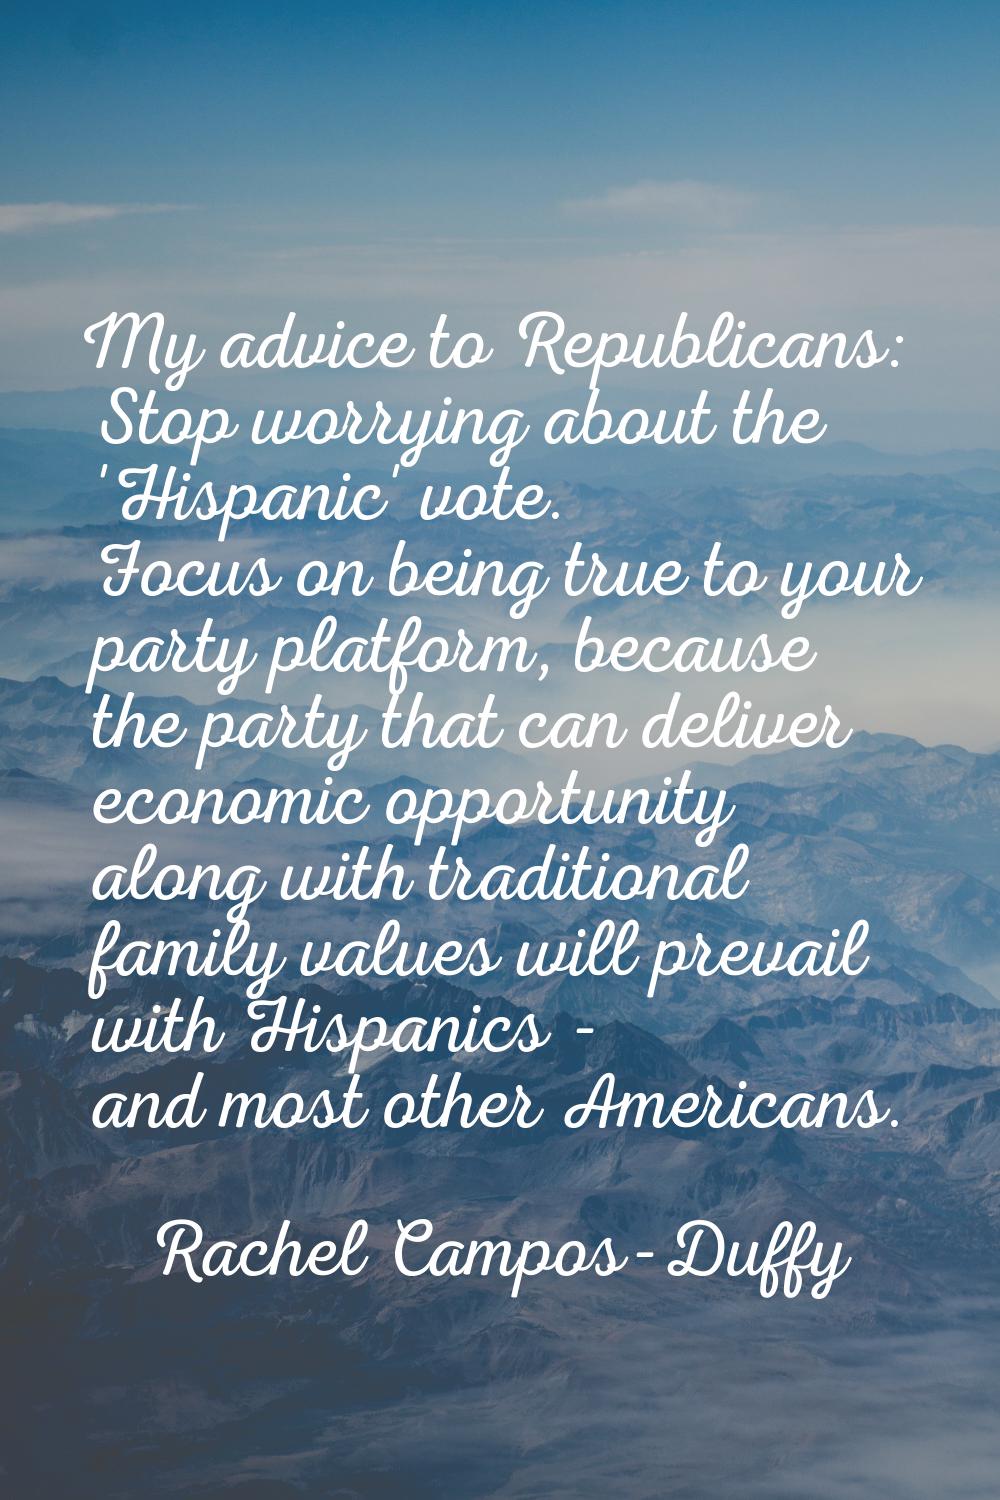 My advice to Republicans: Stop worrying about the 'Hispanic' vote. Focus on being true to your part